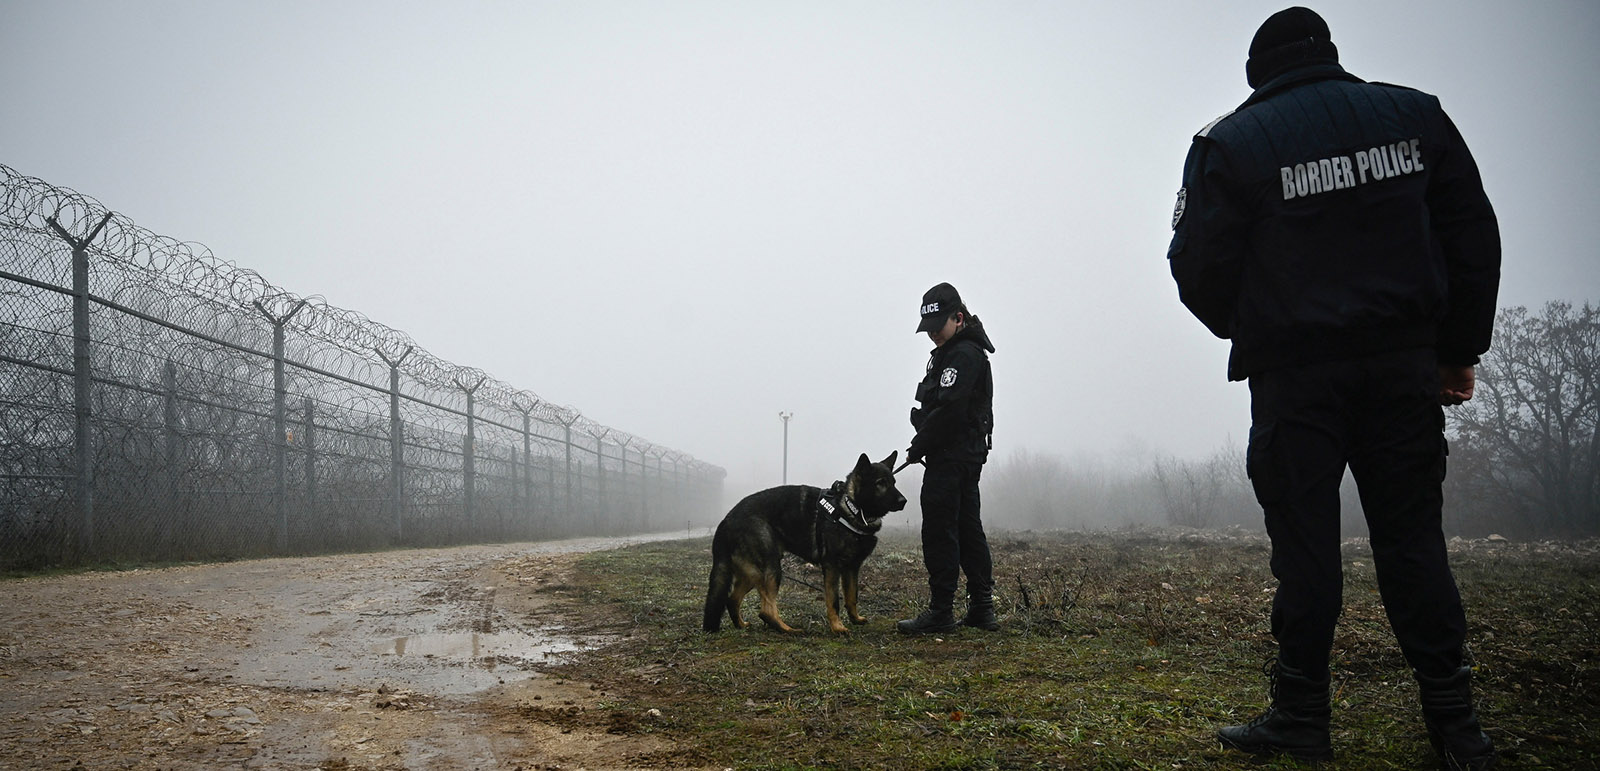 Bulgarian border police officers patrol with a dog in front of the border fence on the Bulgaria-Turkey border near the village of Lesovo on January 13, 2023. - Bulgaria faces mounting accusations that it is abusing people trying to cross its border with Turkey, with asylum seekers saying they have been pushed back, locked up, stripped and beaten. The EU member serves as a gateway into the bloc and is trying to tighten the border to stop a rising number of people seeking to cross, which has reached levels unseen since 2015. (Photo by Nikolay DOYCHINOV / AFP) (Photo by NIKOLAY DOYCHINOV/AFP via Getty Images)